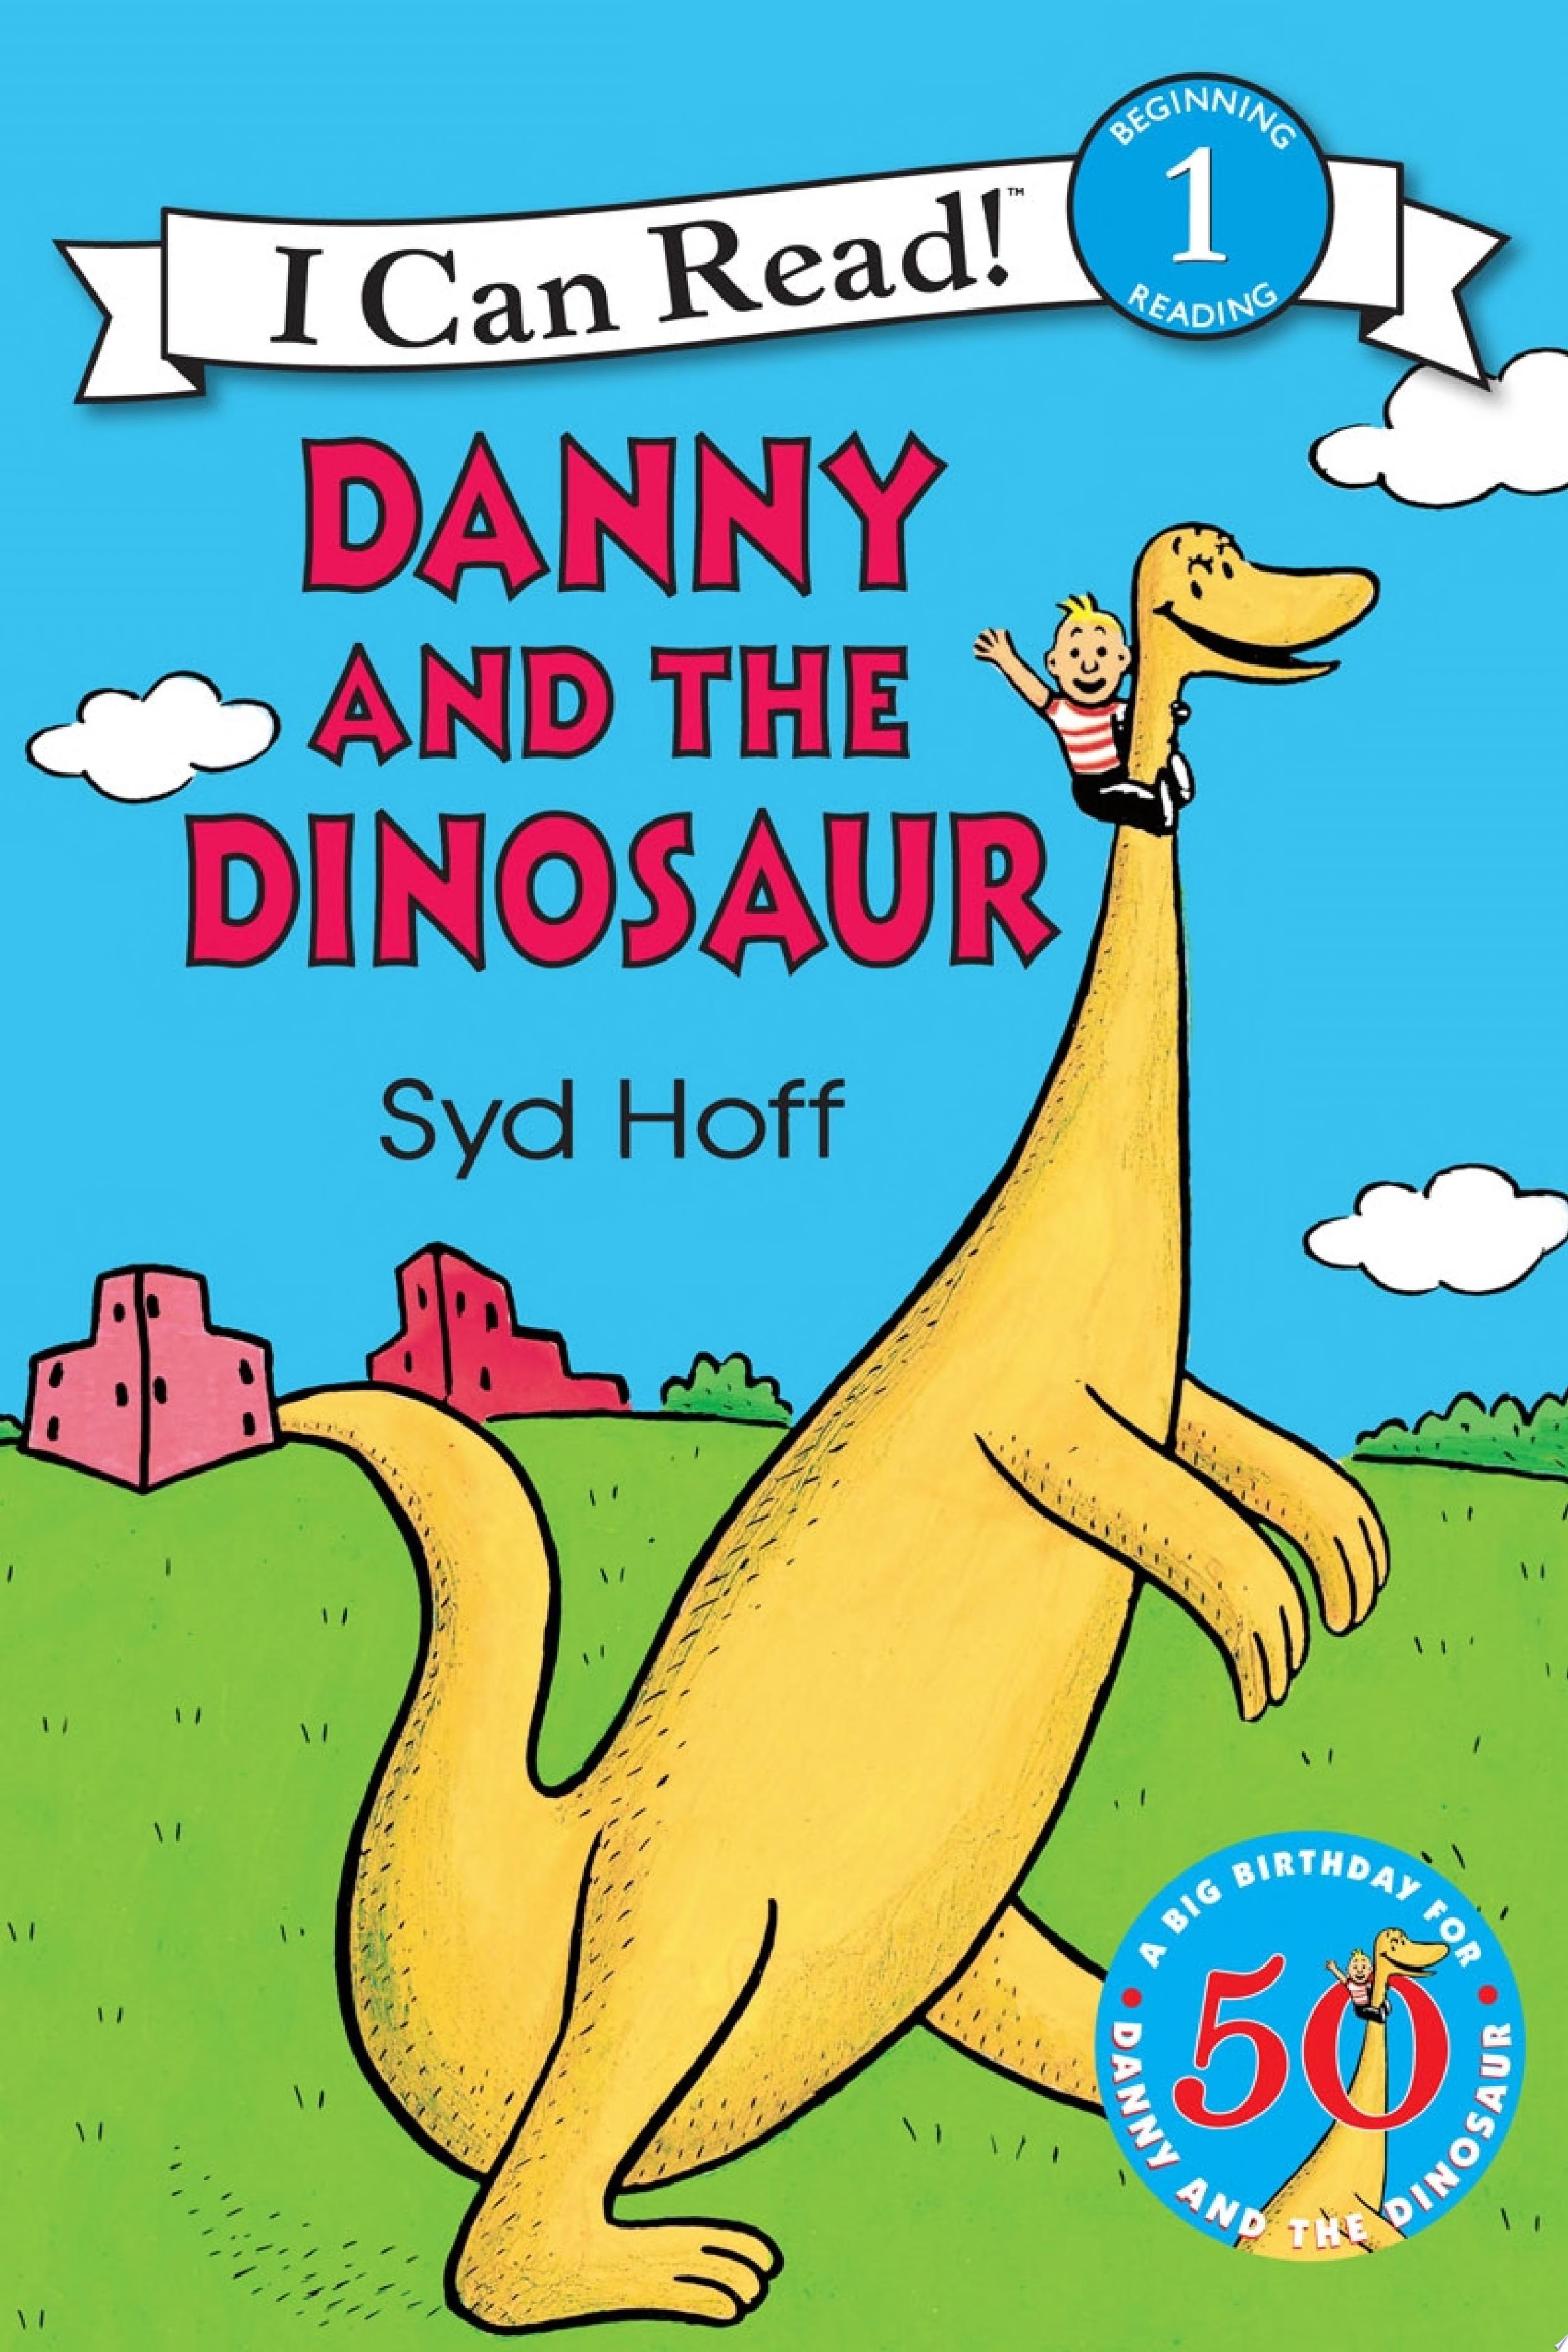 Image for "Danny and the Dinosaur"